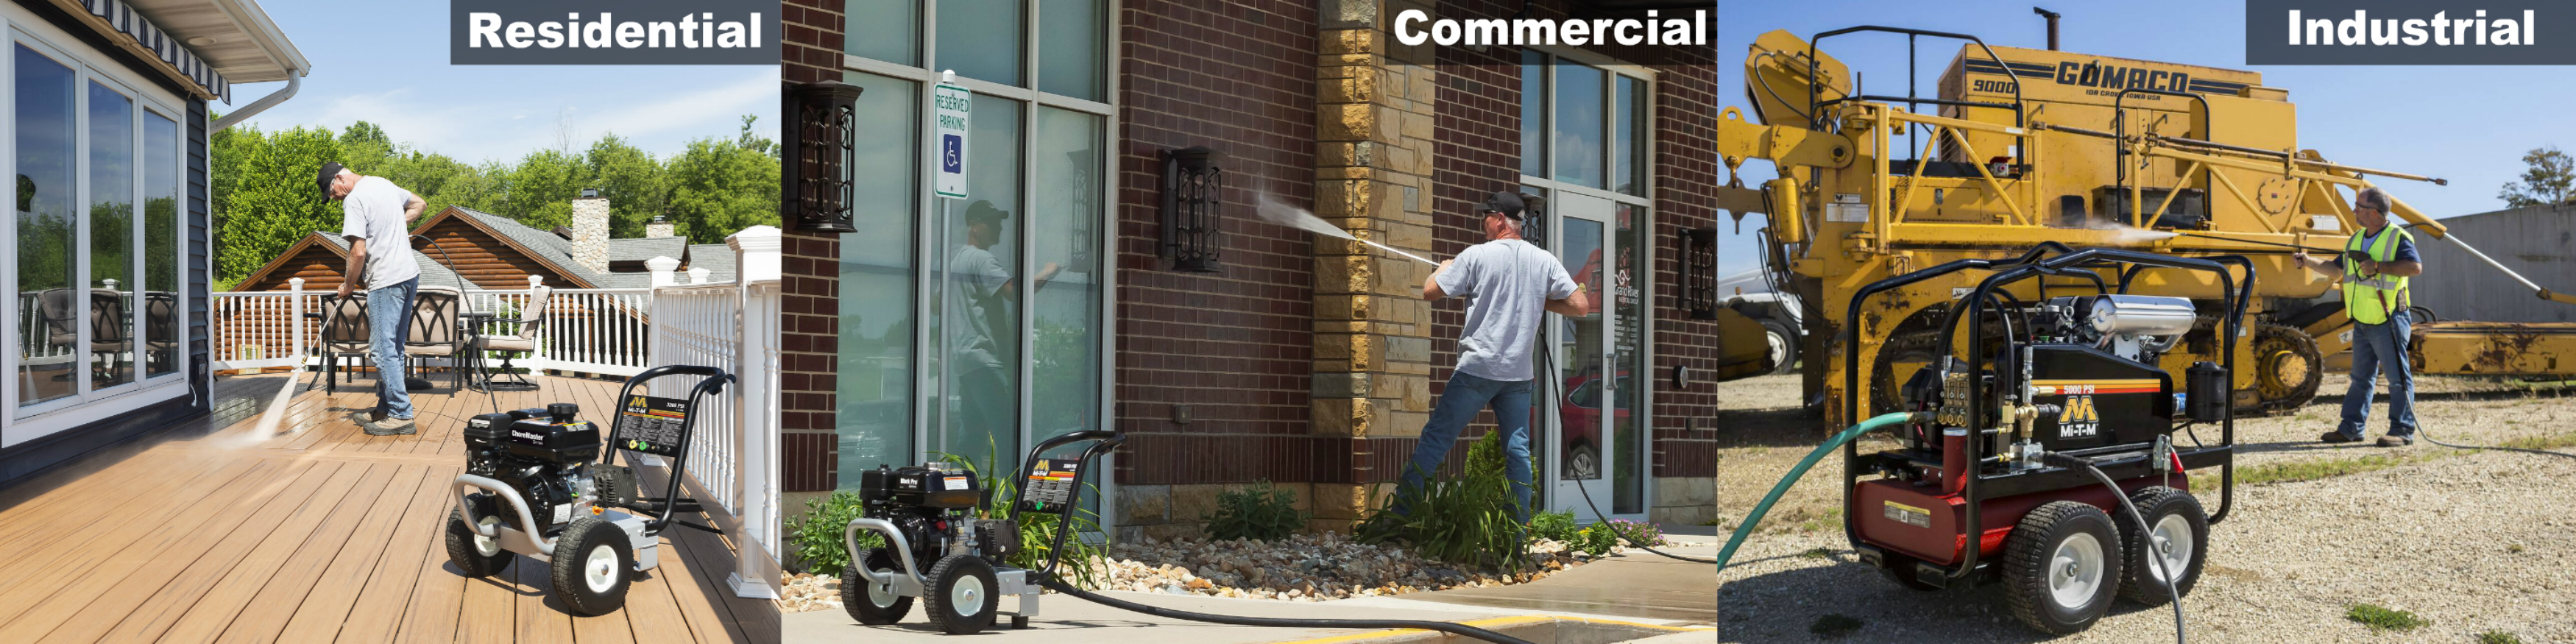 Pressure Washers Residential Commercial Industrial